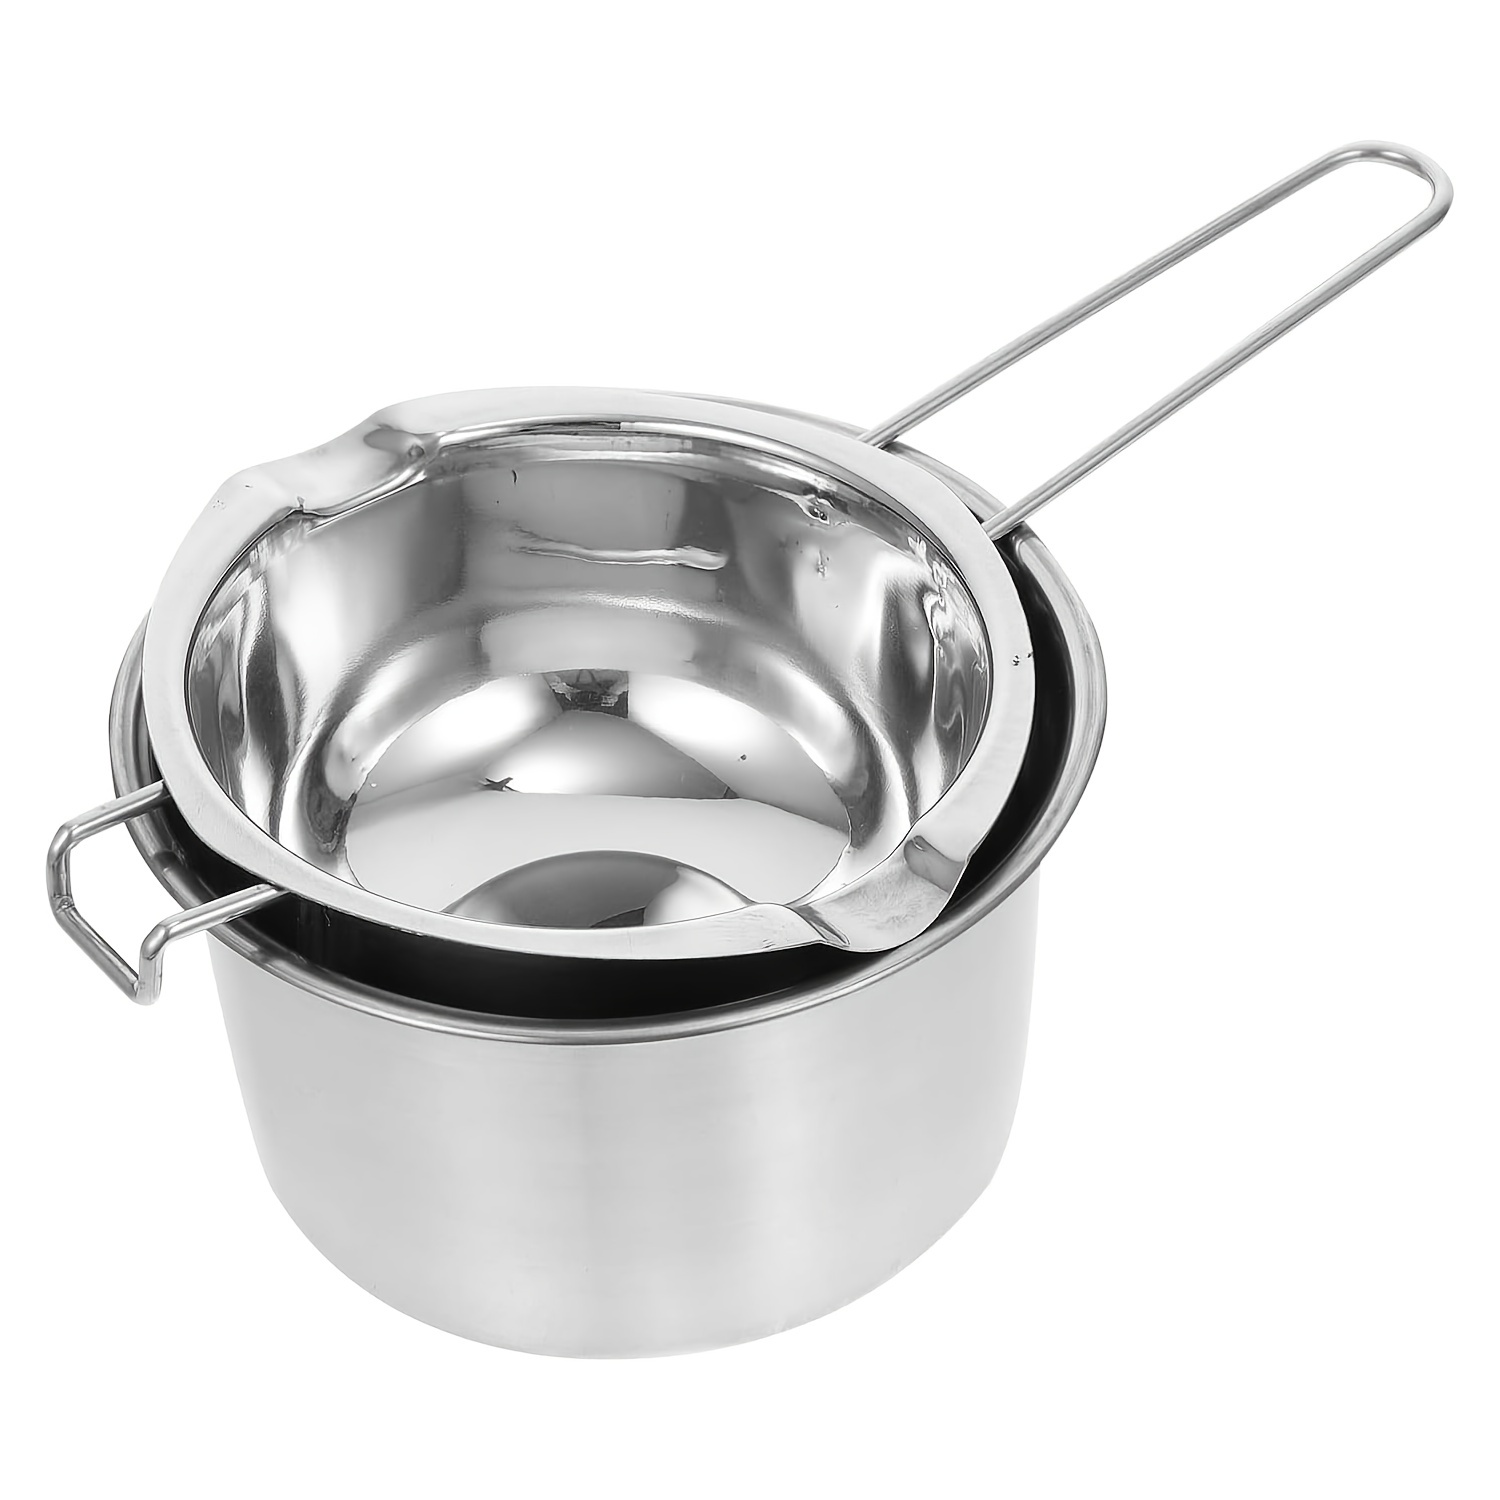 

2 Pcs Stainless Steel Double Boiler Pot Chocolate Melting Pot Soap Candle Candy Making Tool Kit Wax Melting Heat Proof Bowl For Melting Chocolate, Butter, Cheese, Caramel, Candy, Candle, Wax